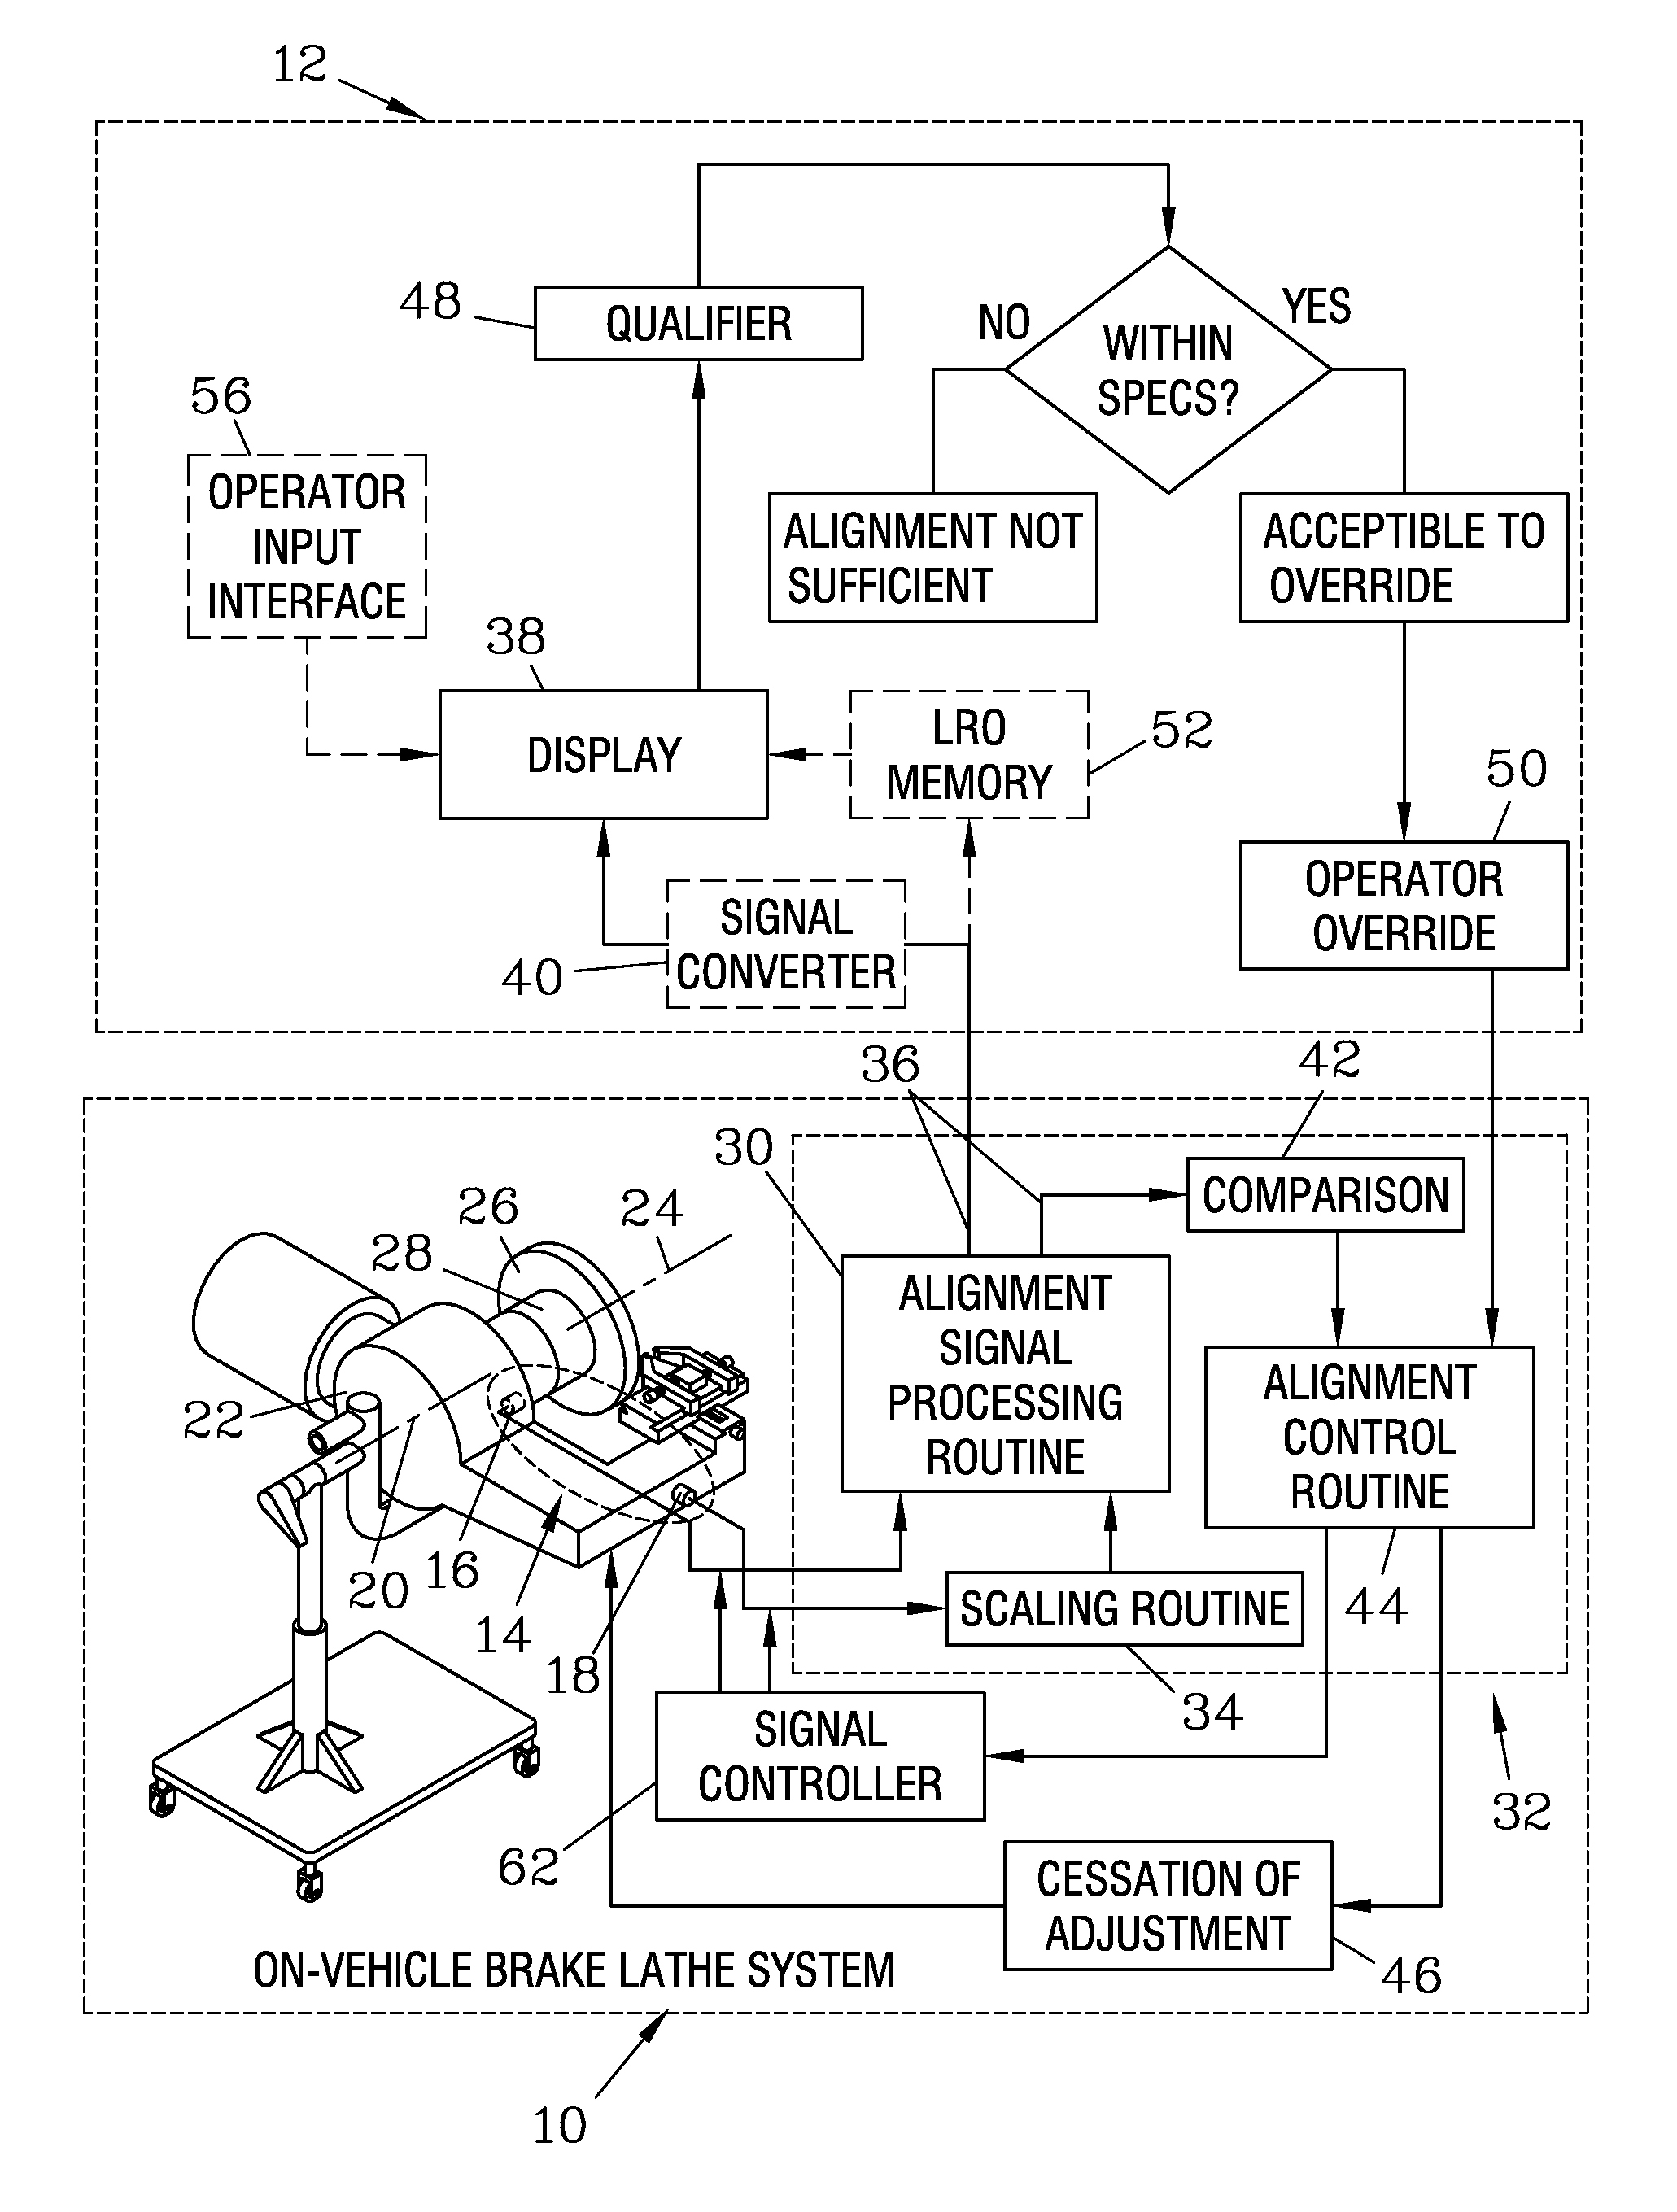 Dynamic alignment monitoring system for on-vehicle disk brake lathe